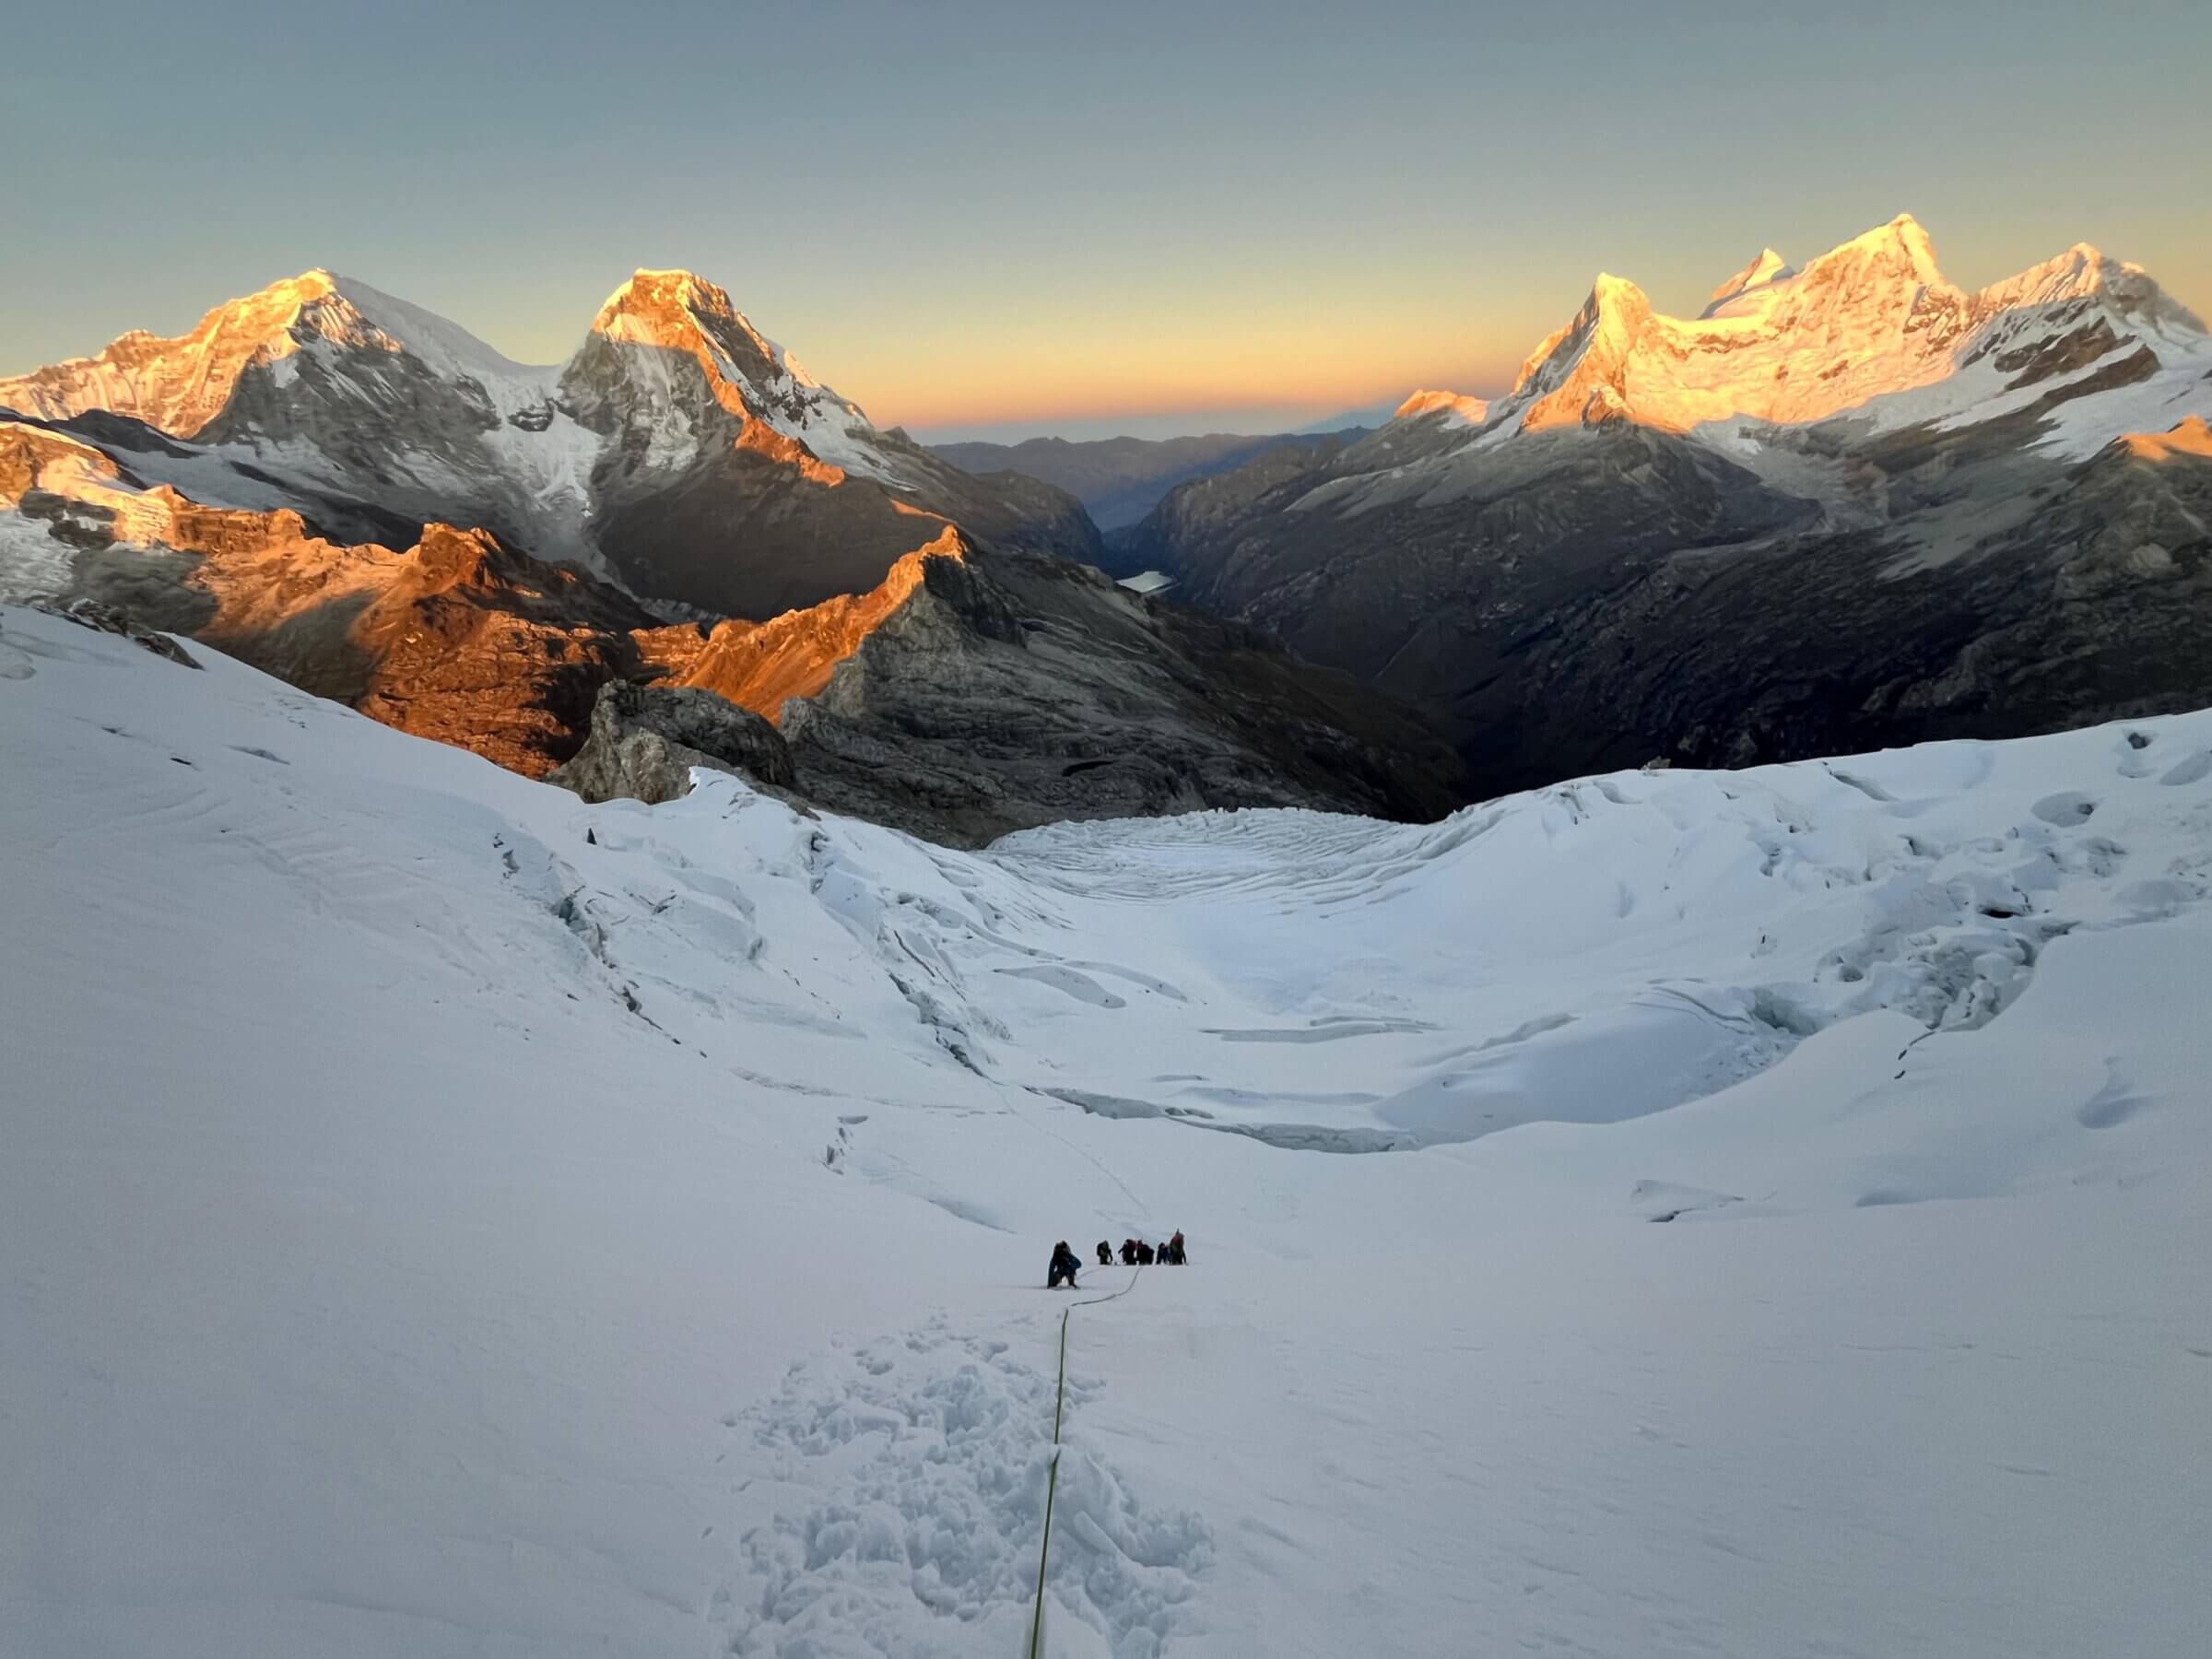 A group of climbers looks very small in the center of a wide snowfield with large mountains behind them in golden light.